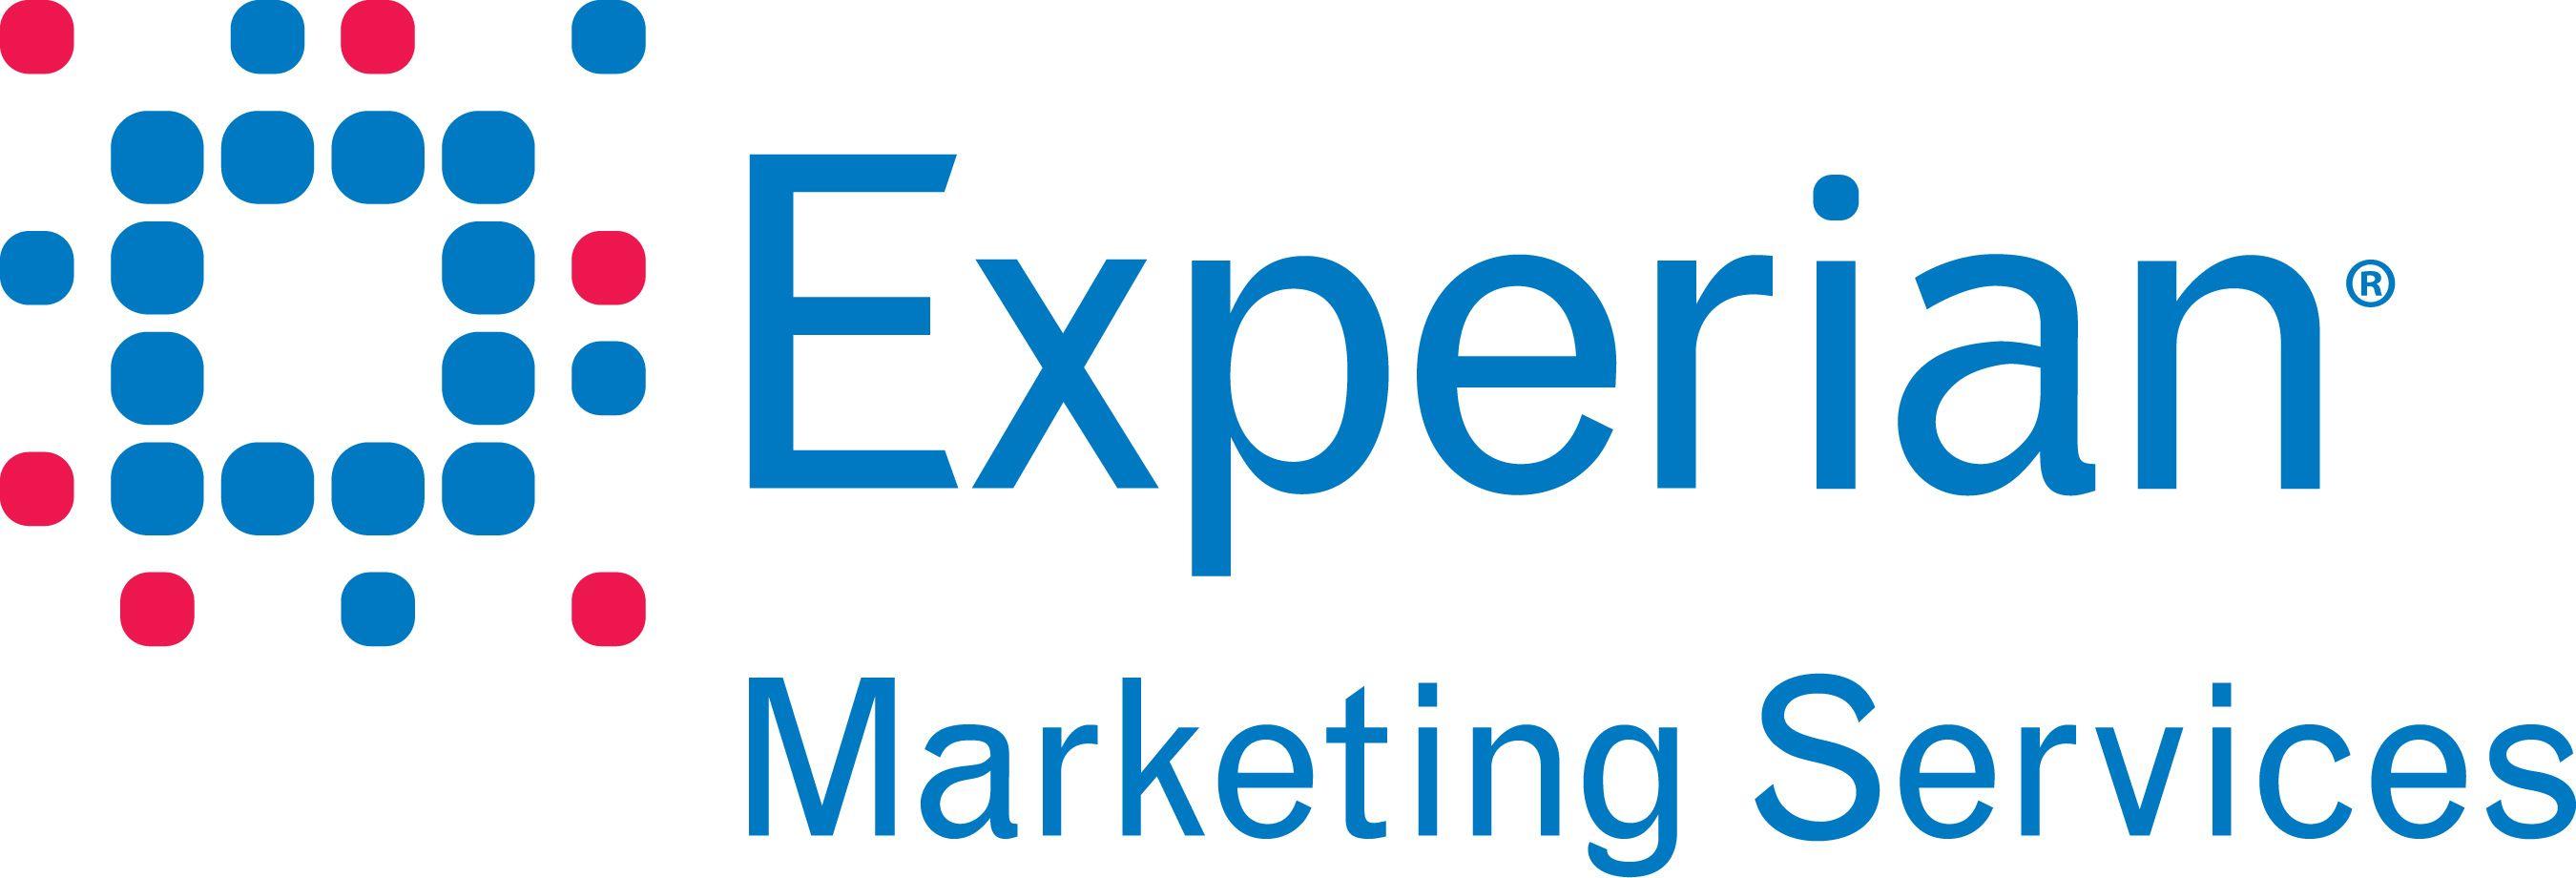 New Experian Logo - New insight from Experian Marketing Services helps brands prepare ...